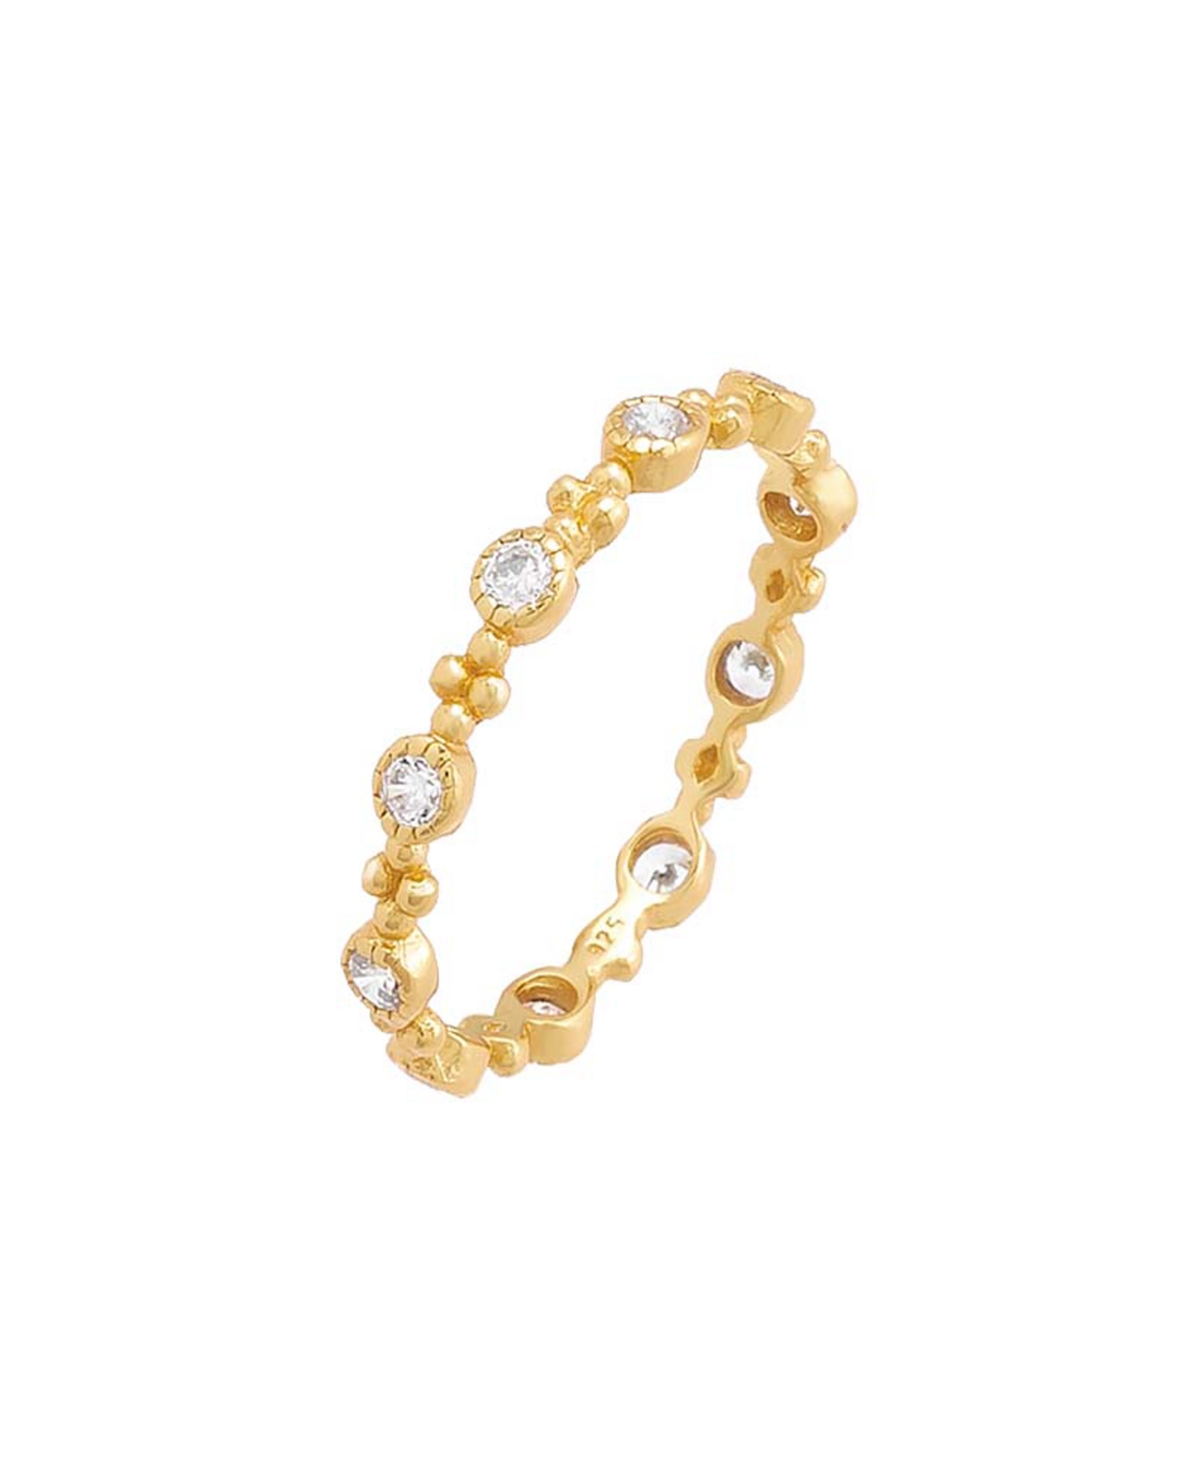 by Adina Eden 14k Gold-Plated Sterling Silver Bead & Cubic Zirconia Eternity Stack Ring